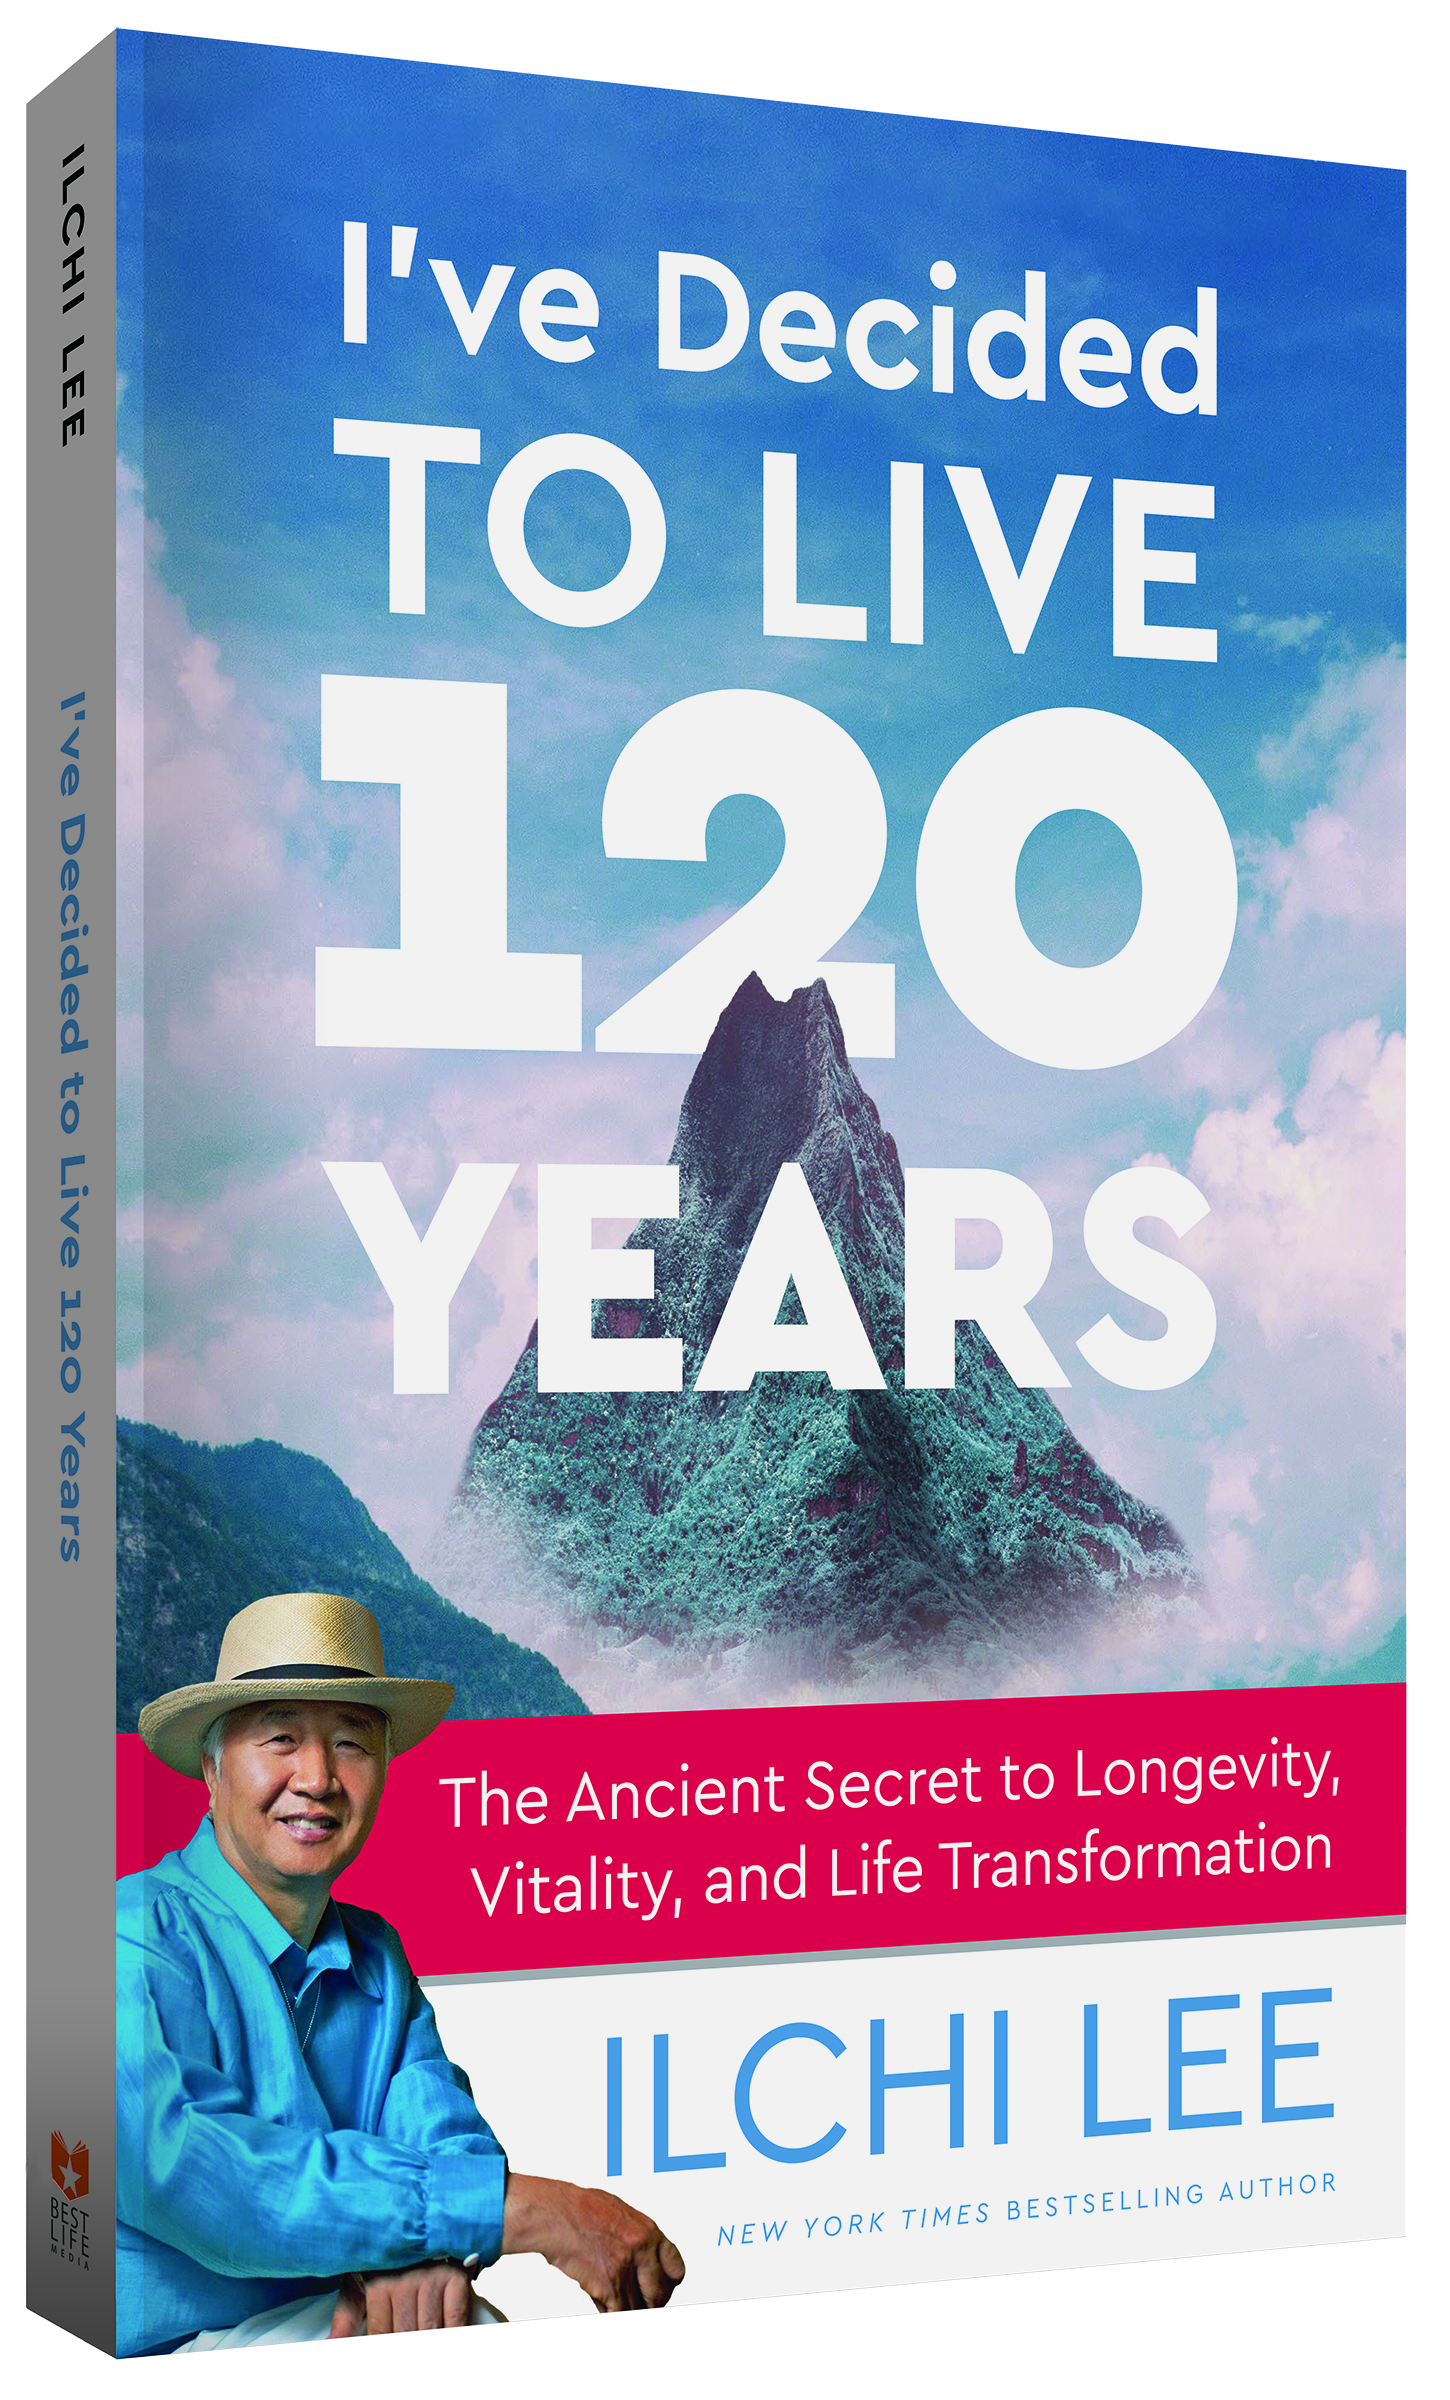 I've Decided to Live 120 Years: The Ancient Secret to Longevity, Vitality, and Life Transformation by Ilchi Lee